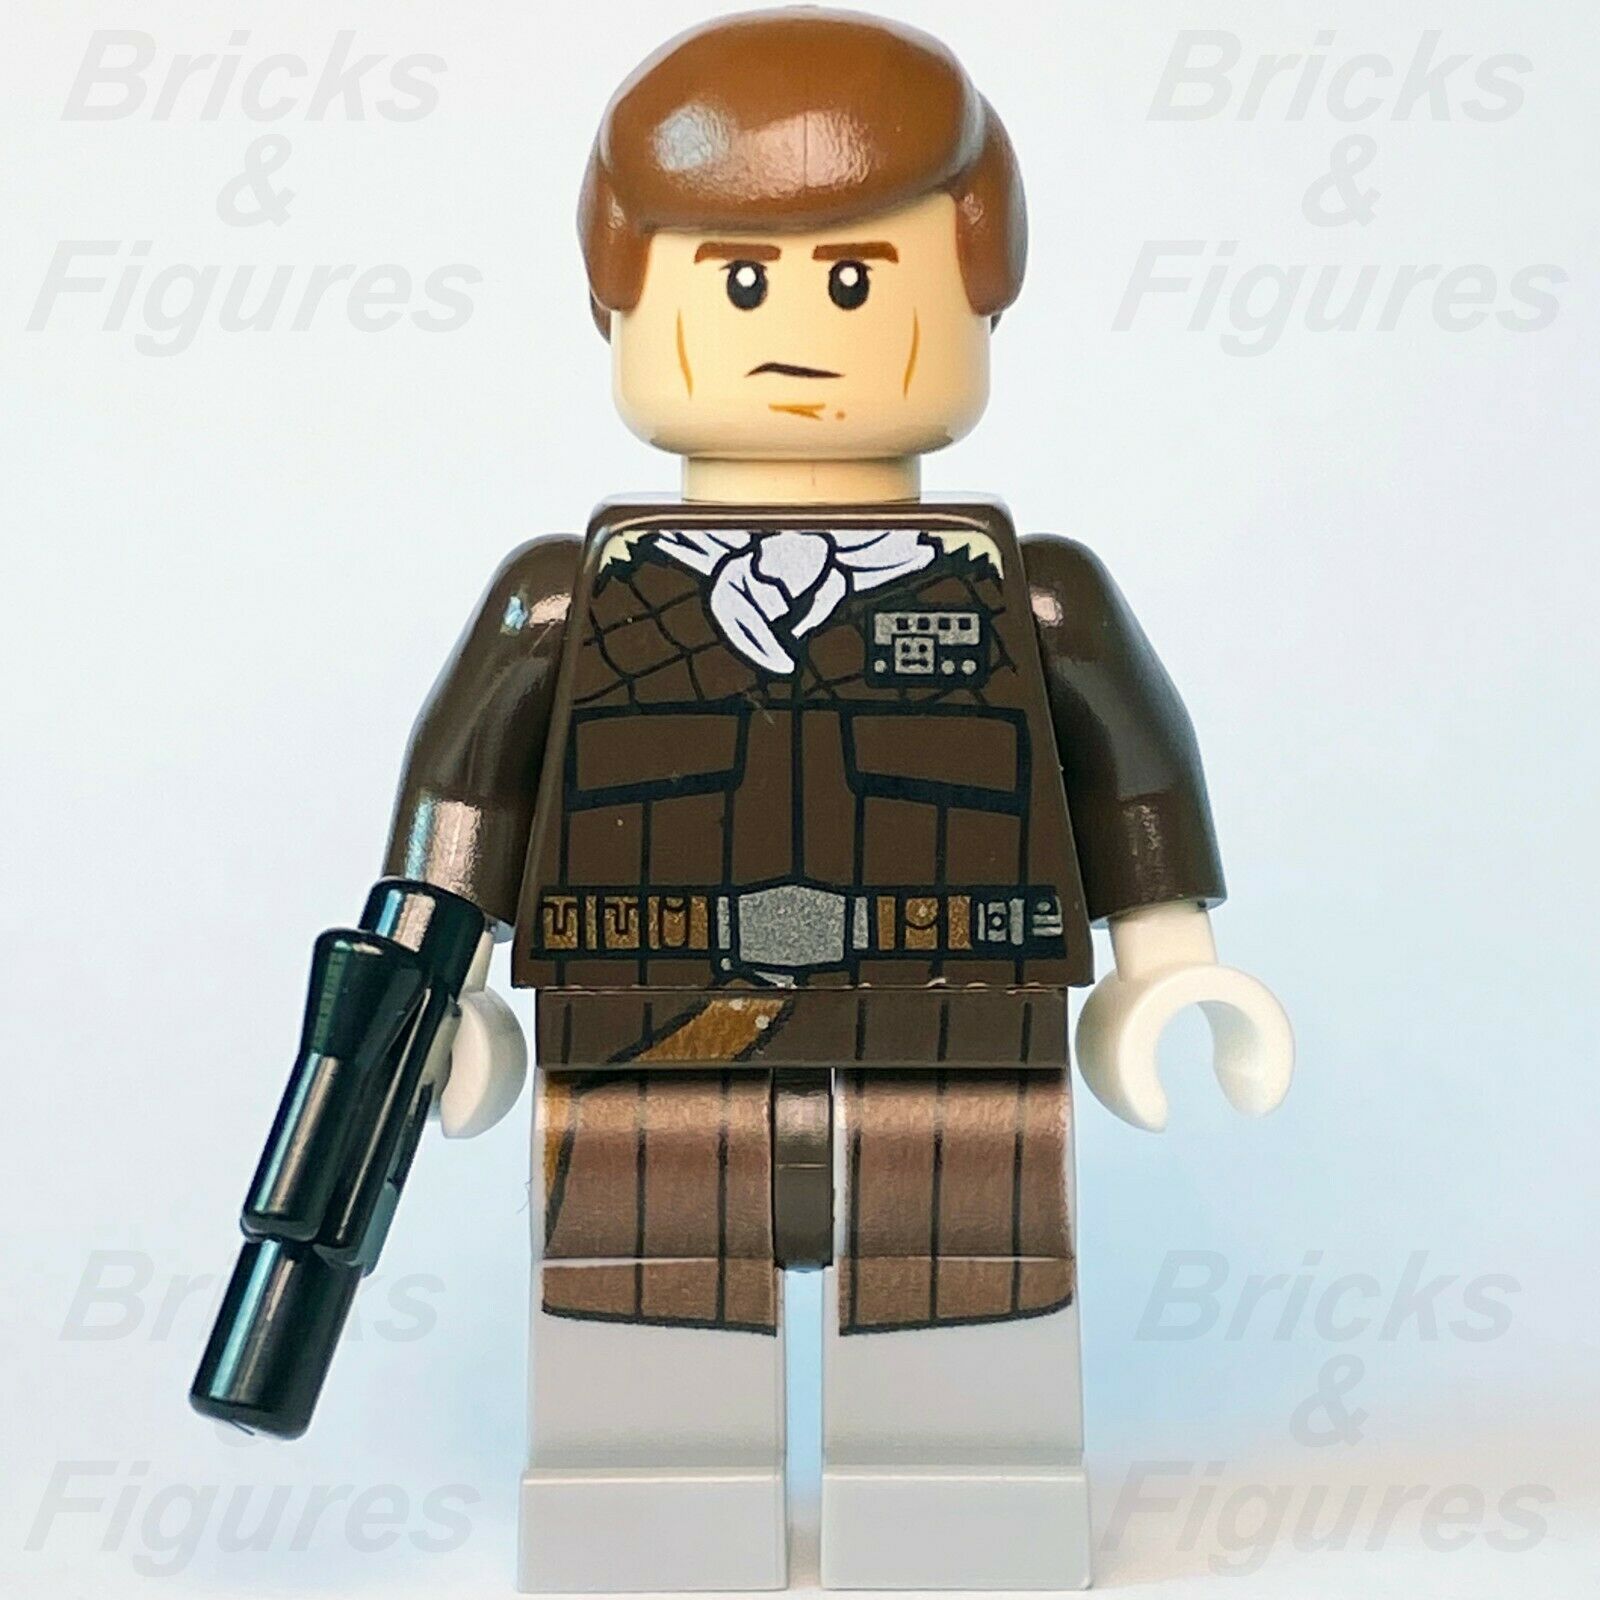 New Star Wars LEGO Han Solo Rebel Alliance Hoth Outfit Minifigure 75098 - Bricks & Figures